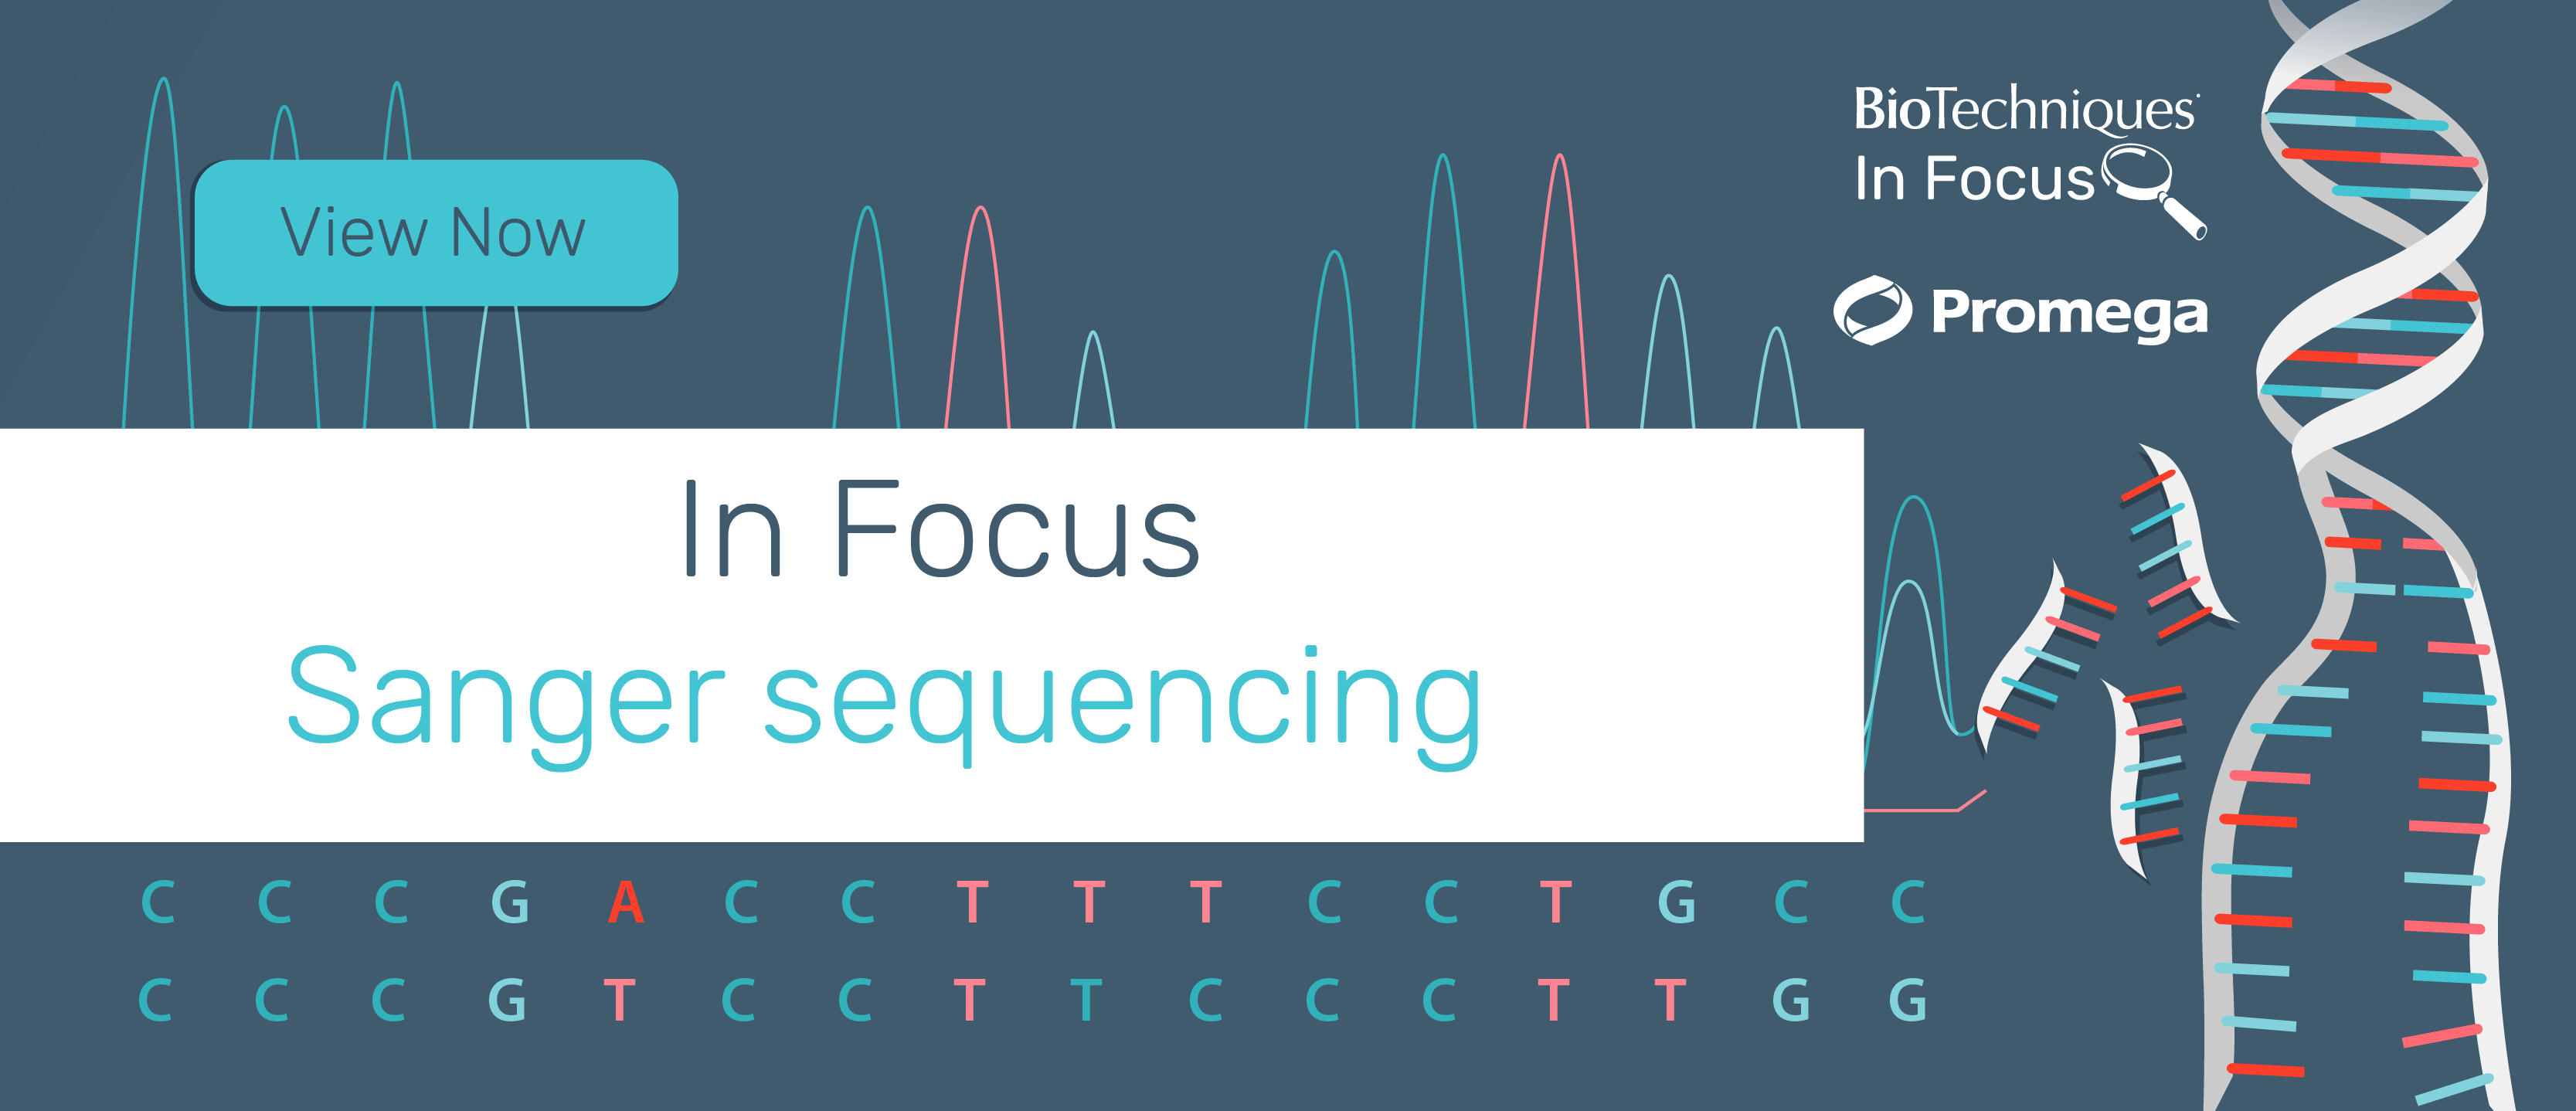 Sanger sequencing